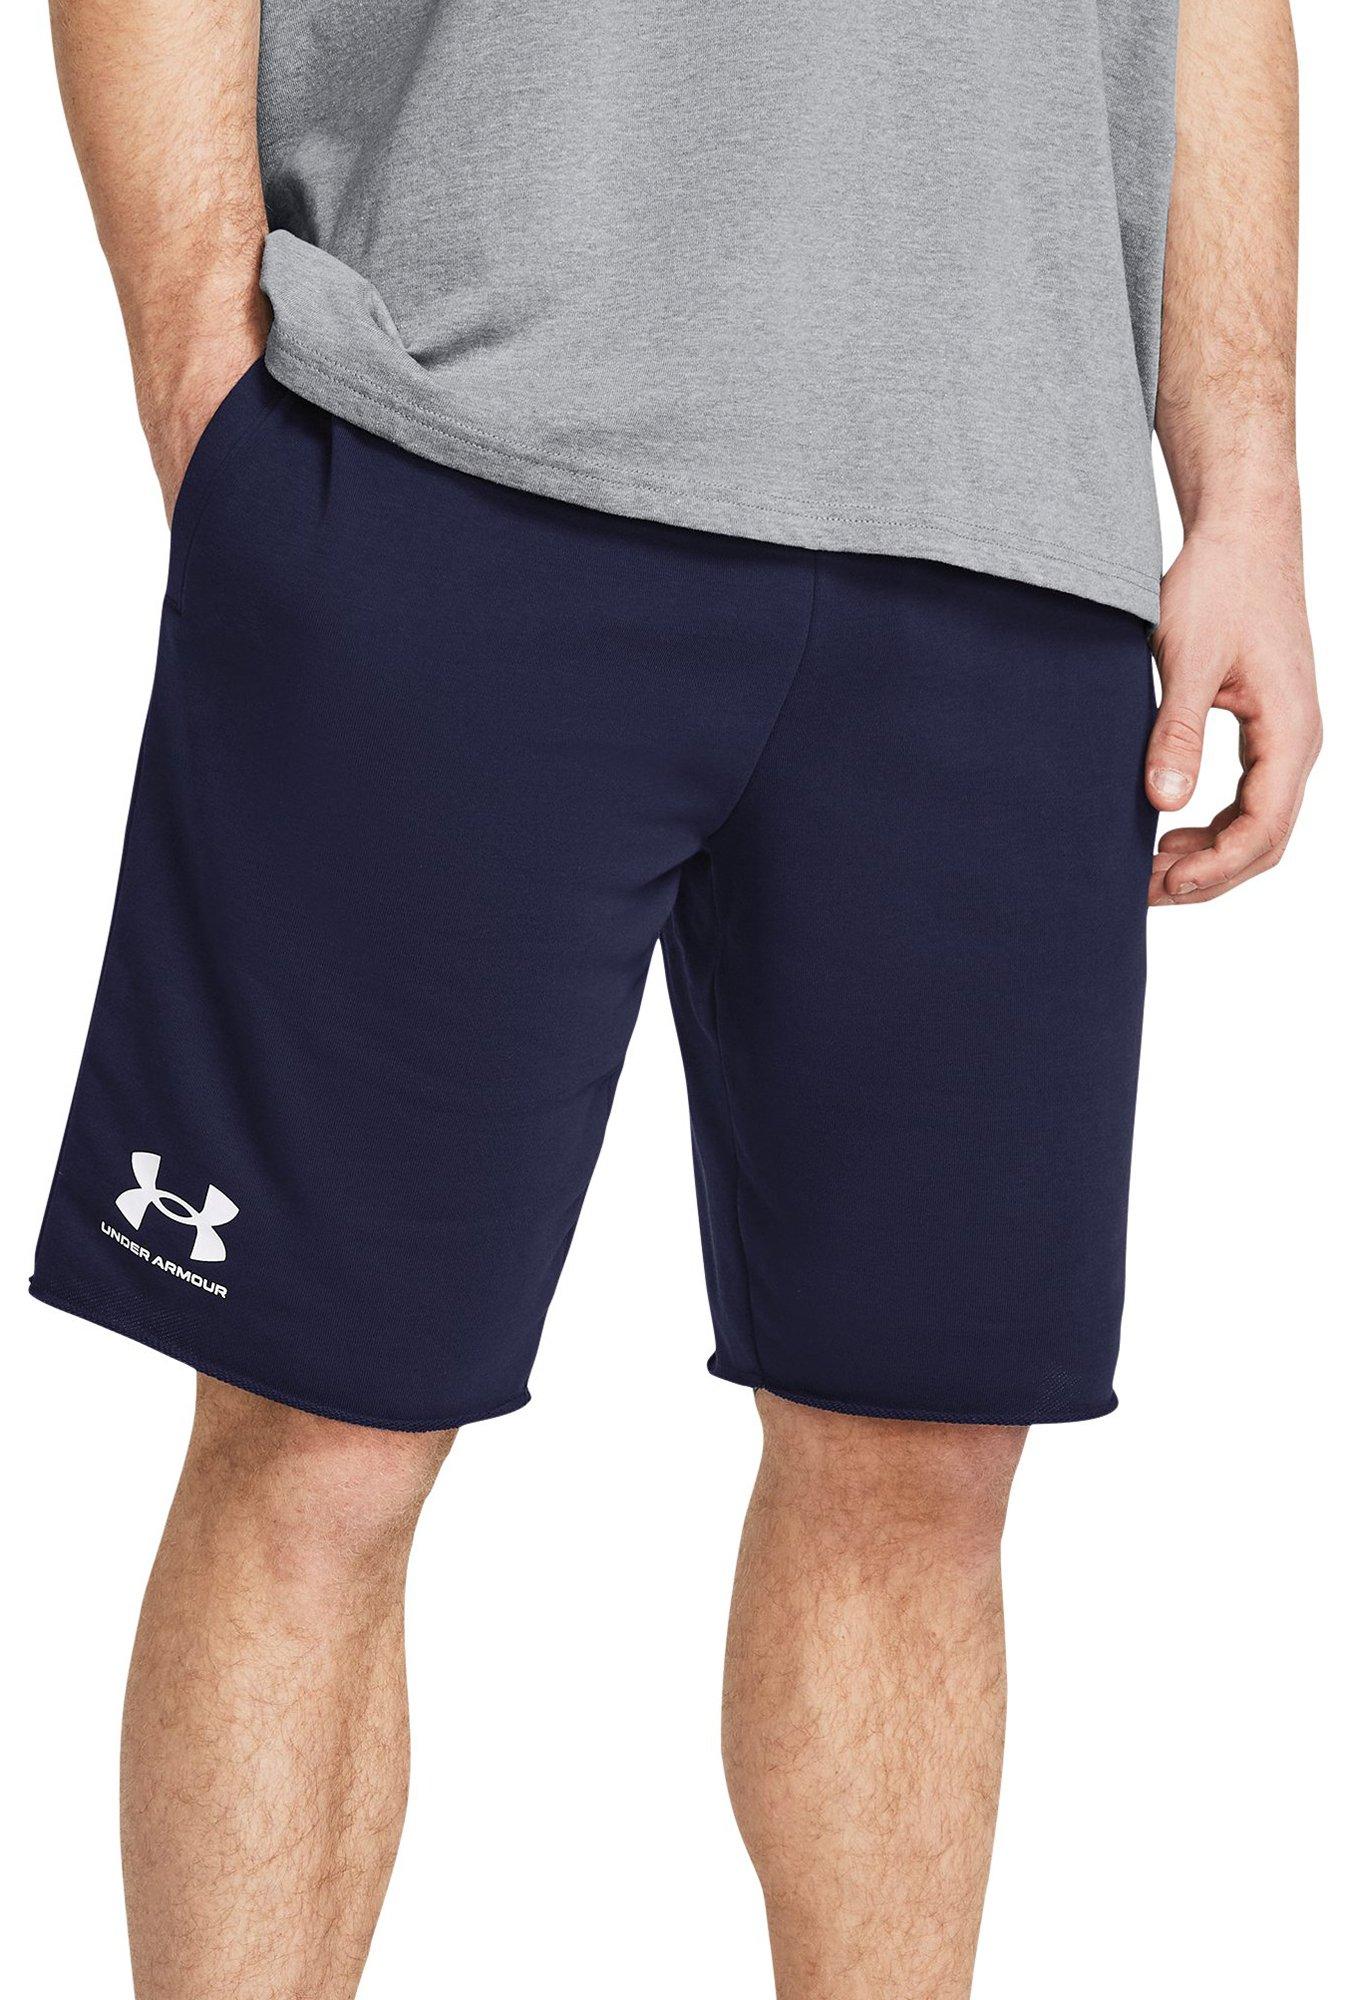 Mens Under Armour 10 in. Rival Terry Raw